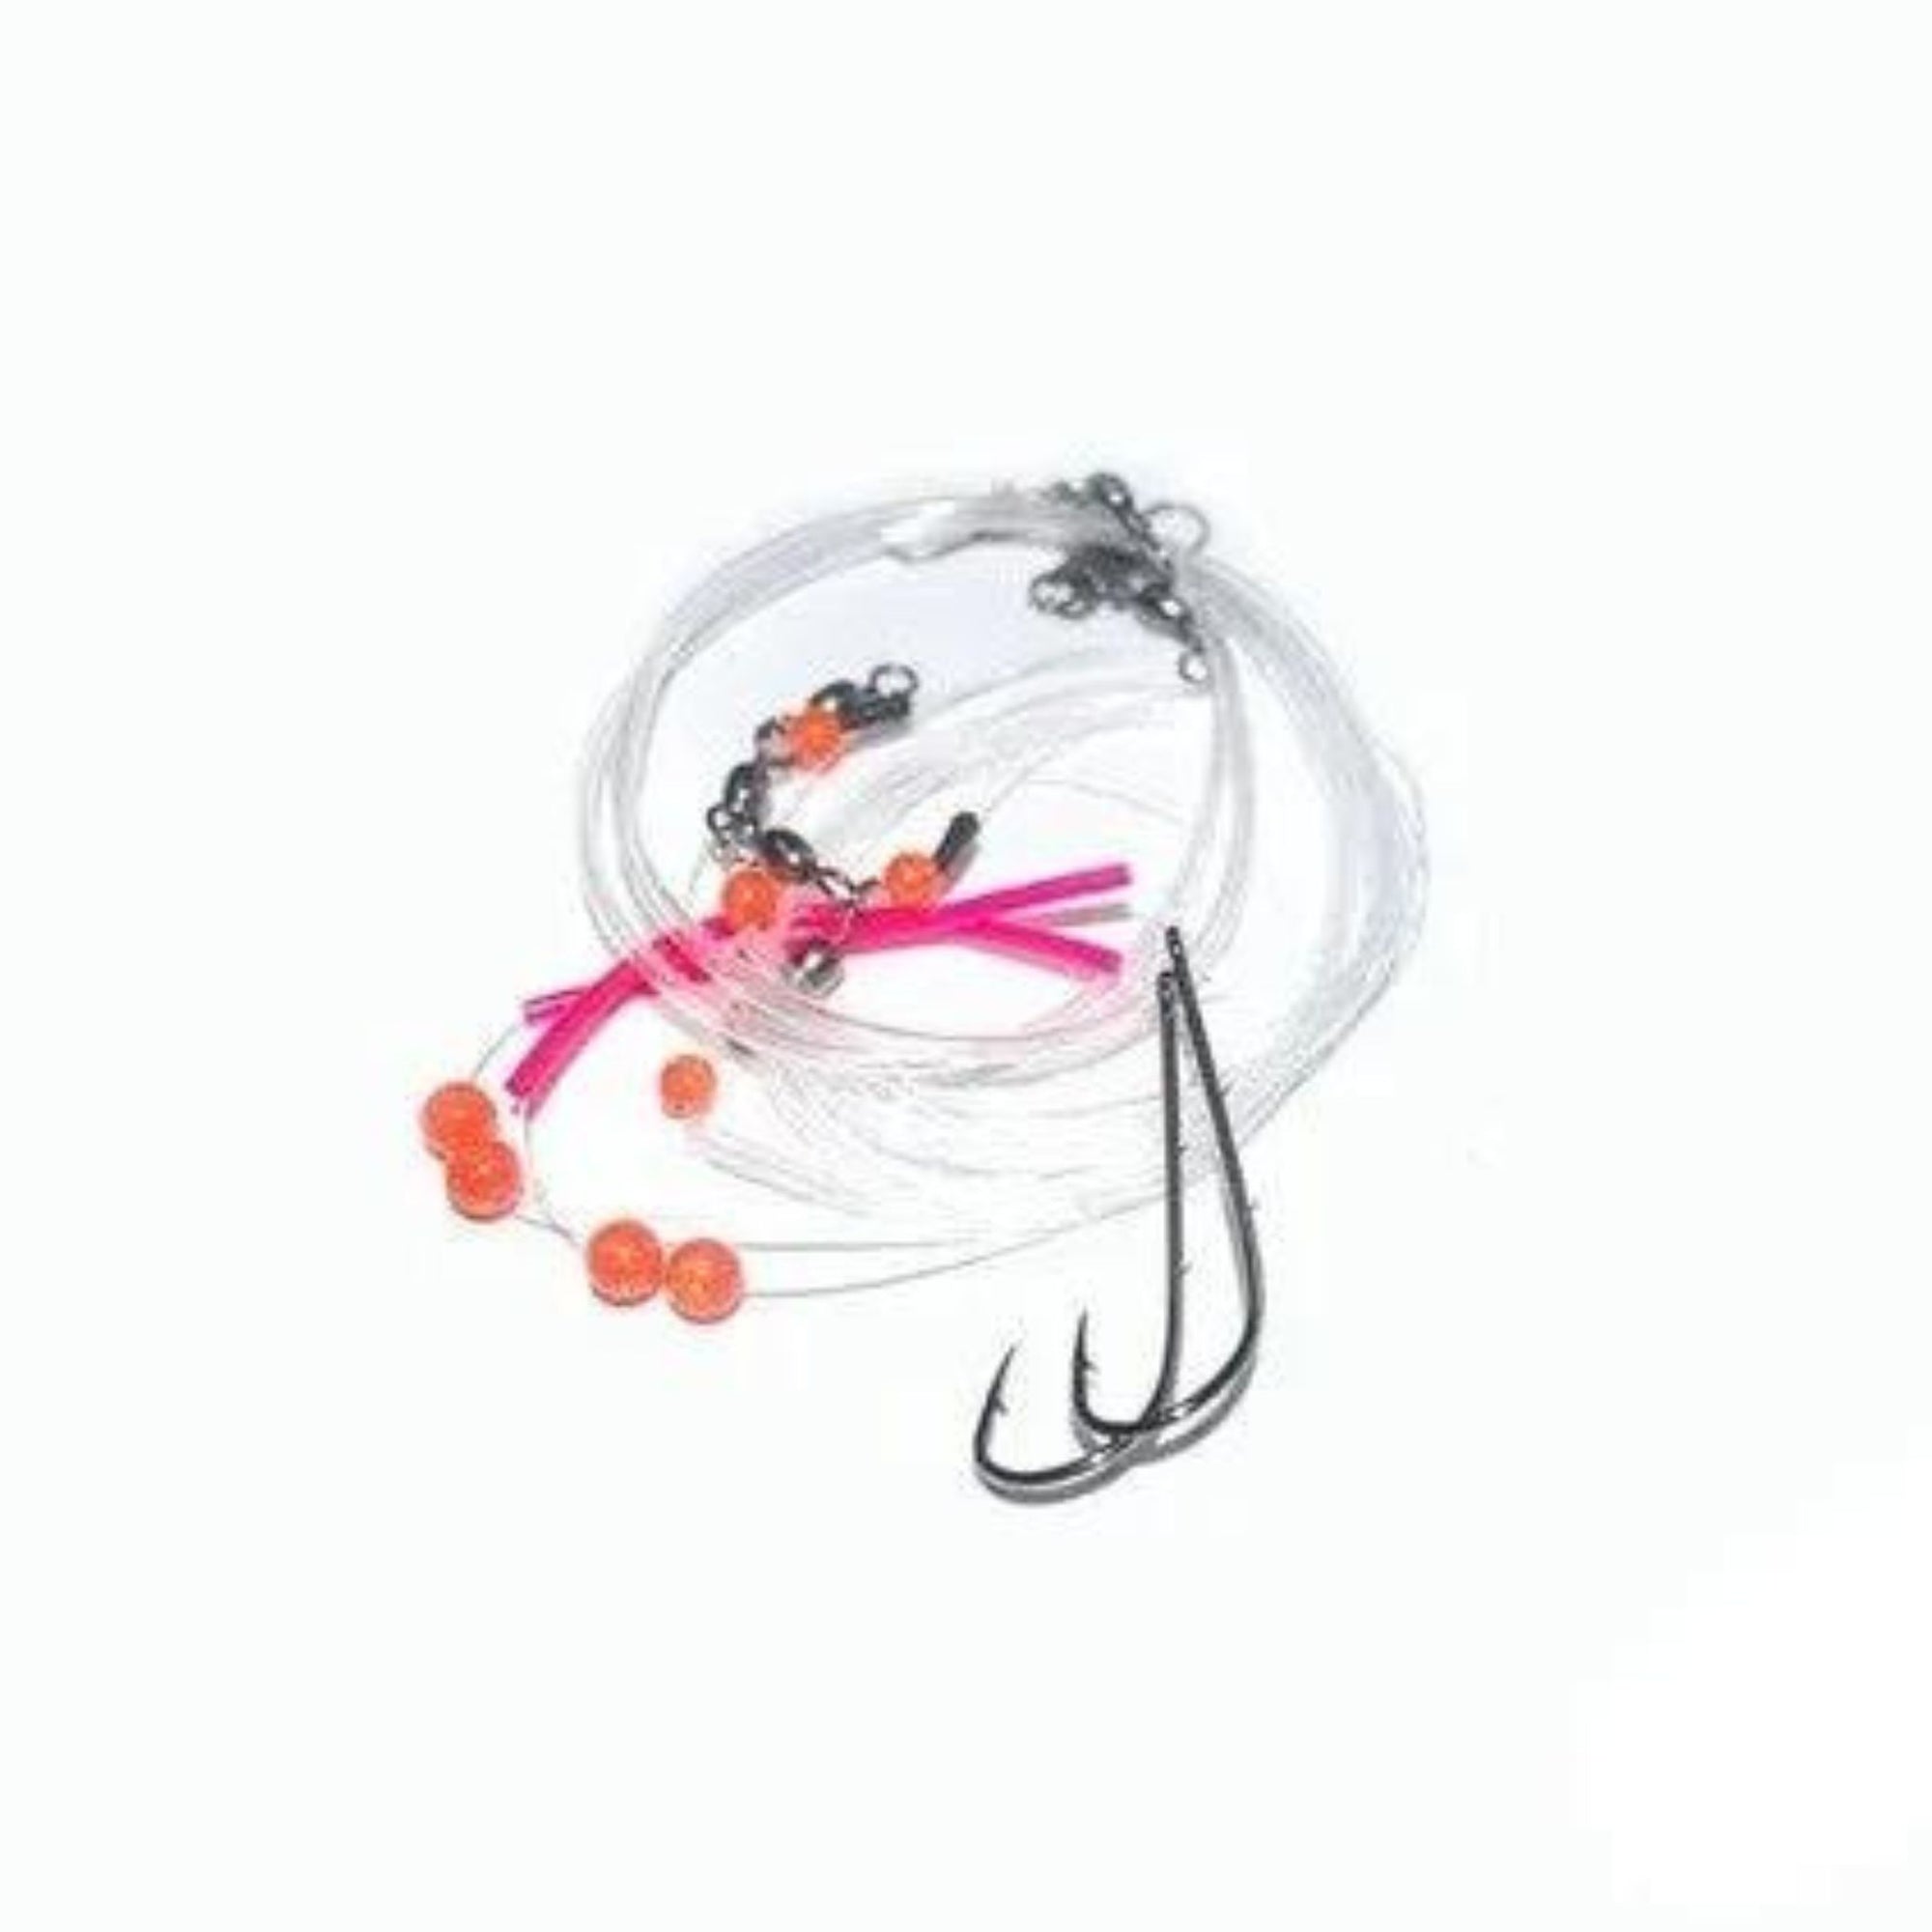 Kamikaze Fluoro Line Twist Free - Whiting Rigs - South East Clearance Centre